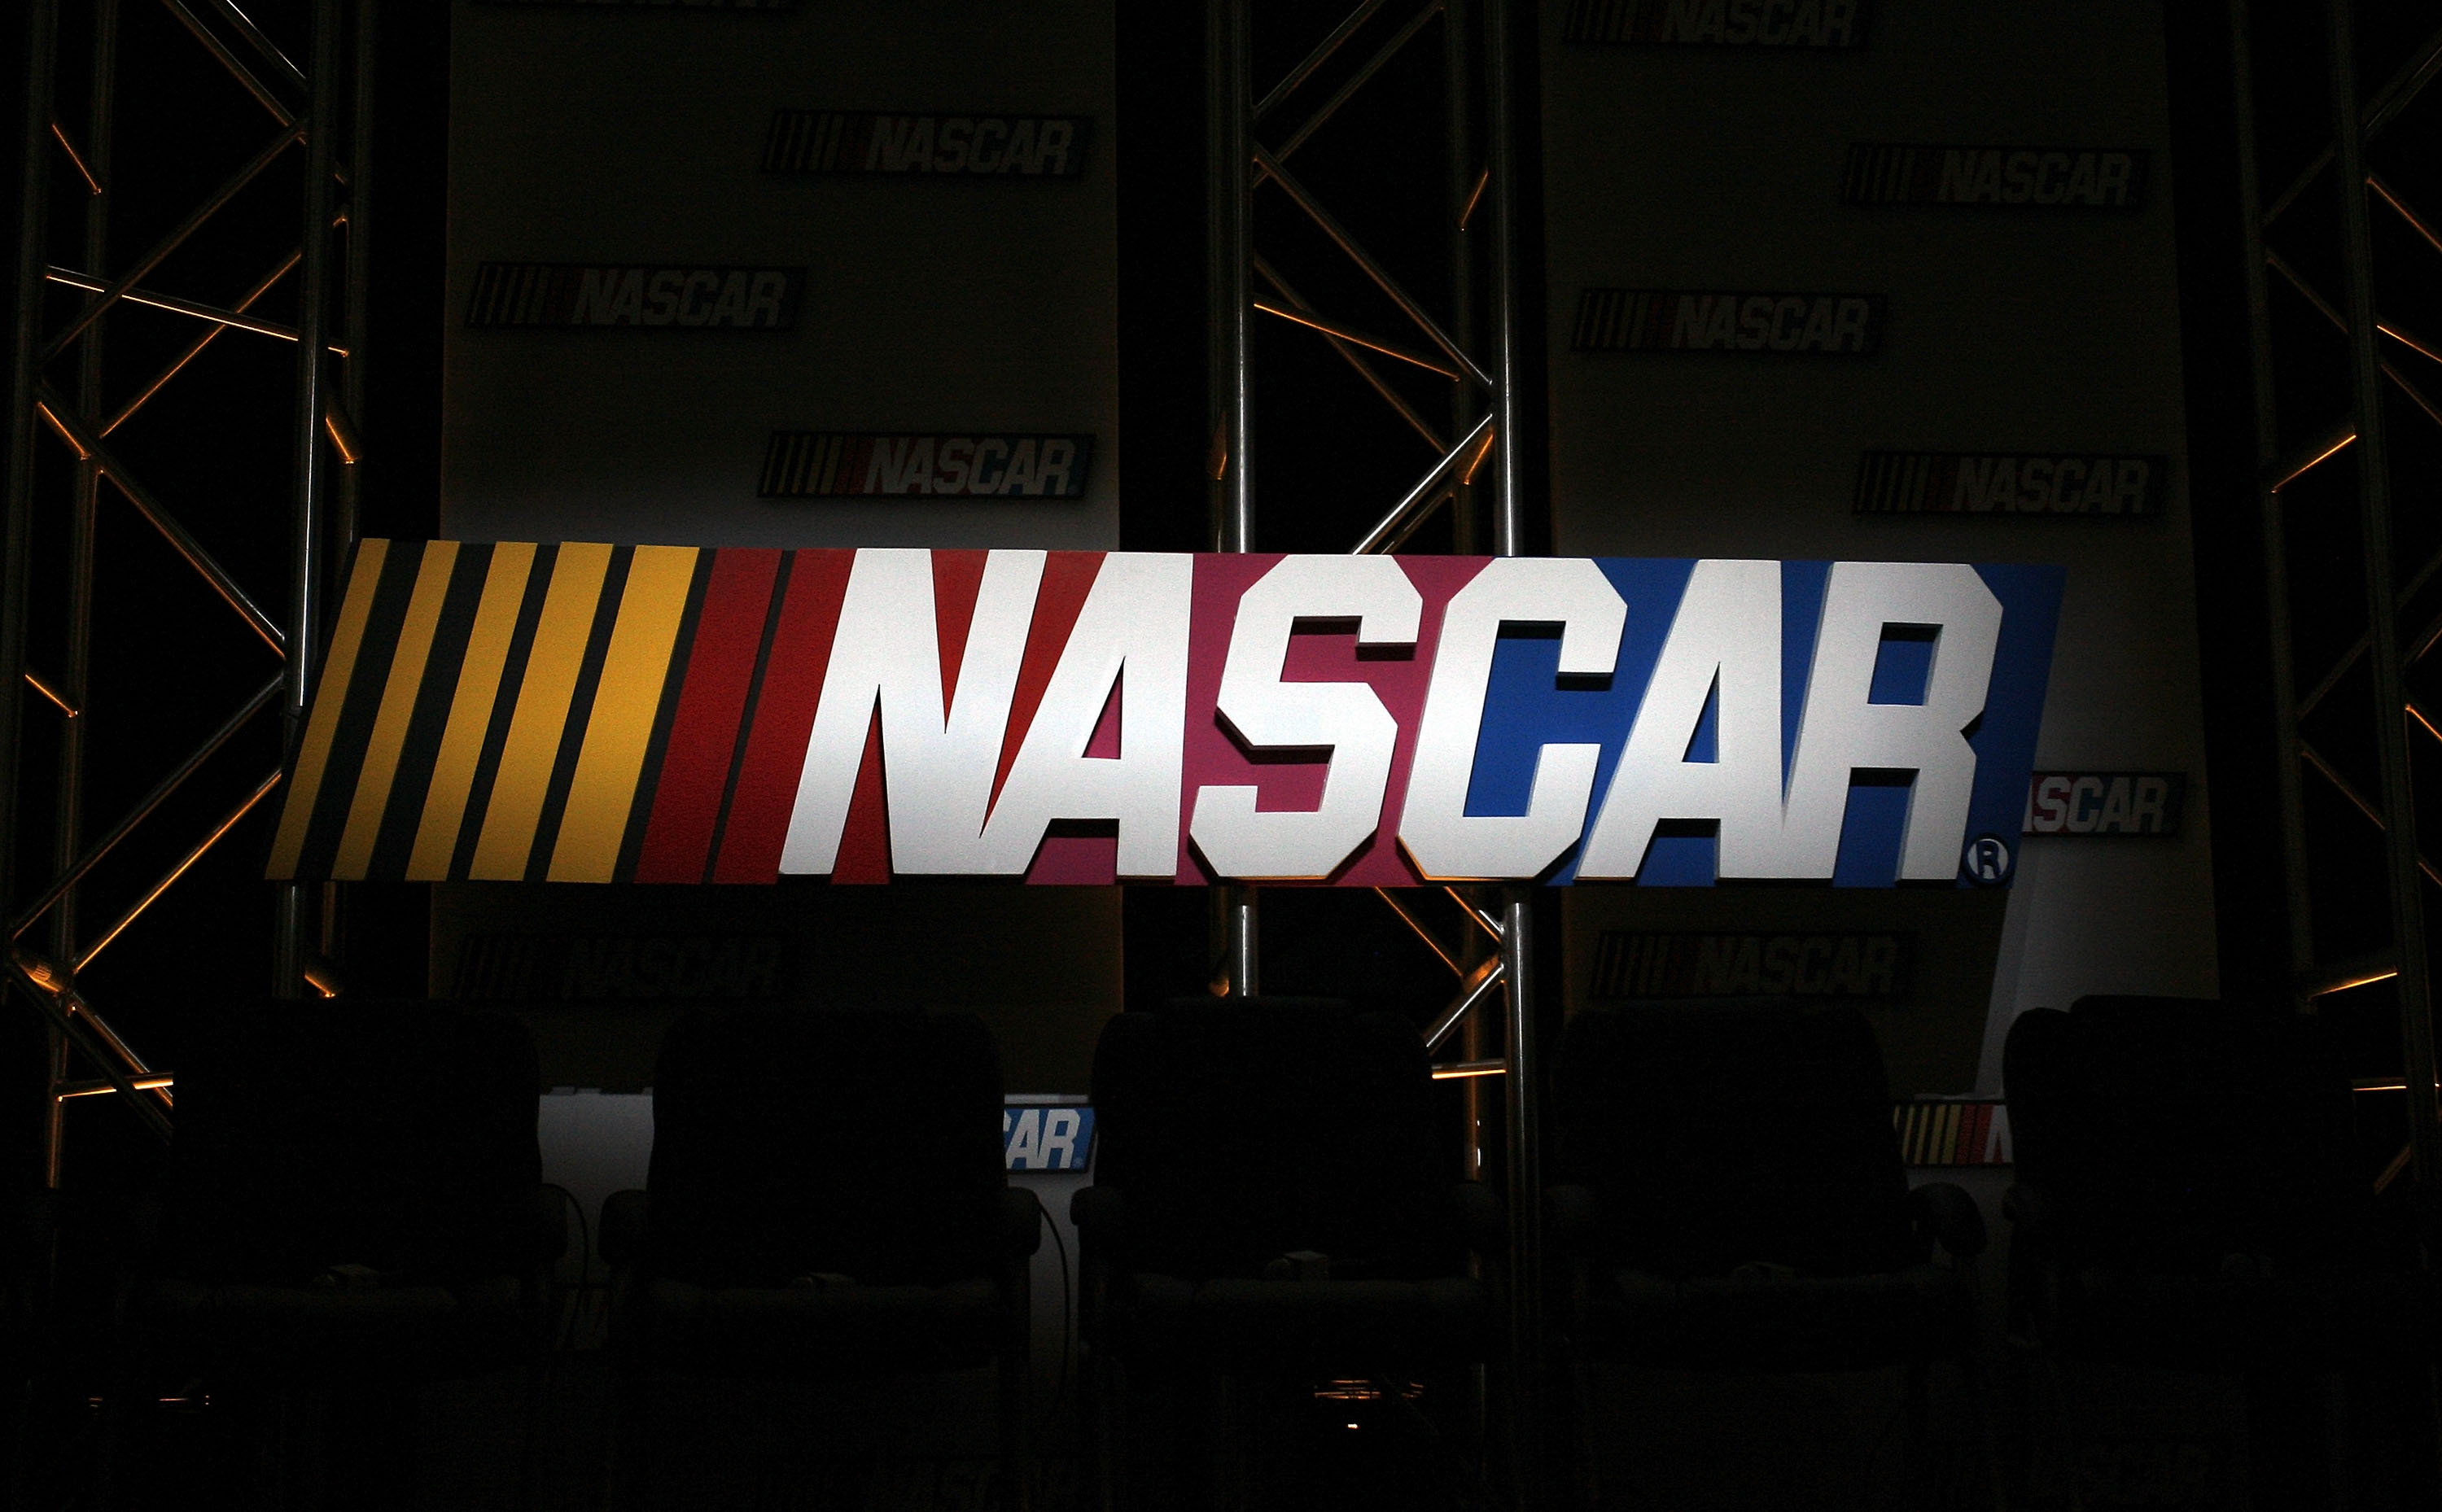 A general view of the NASCAR logo displayed during the NASCAR Sprint Media Tour hosted by Lowe's Motor Speedway at the NASCAR Research and Development Center January 22, 2009 in Concord, North Carolina. (Jason Smith&mdash;NASCAR/Getty Images)